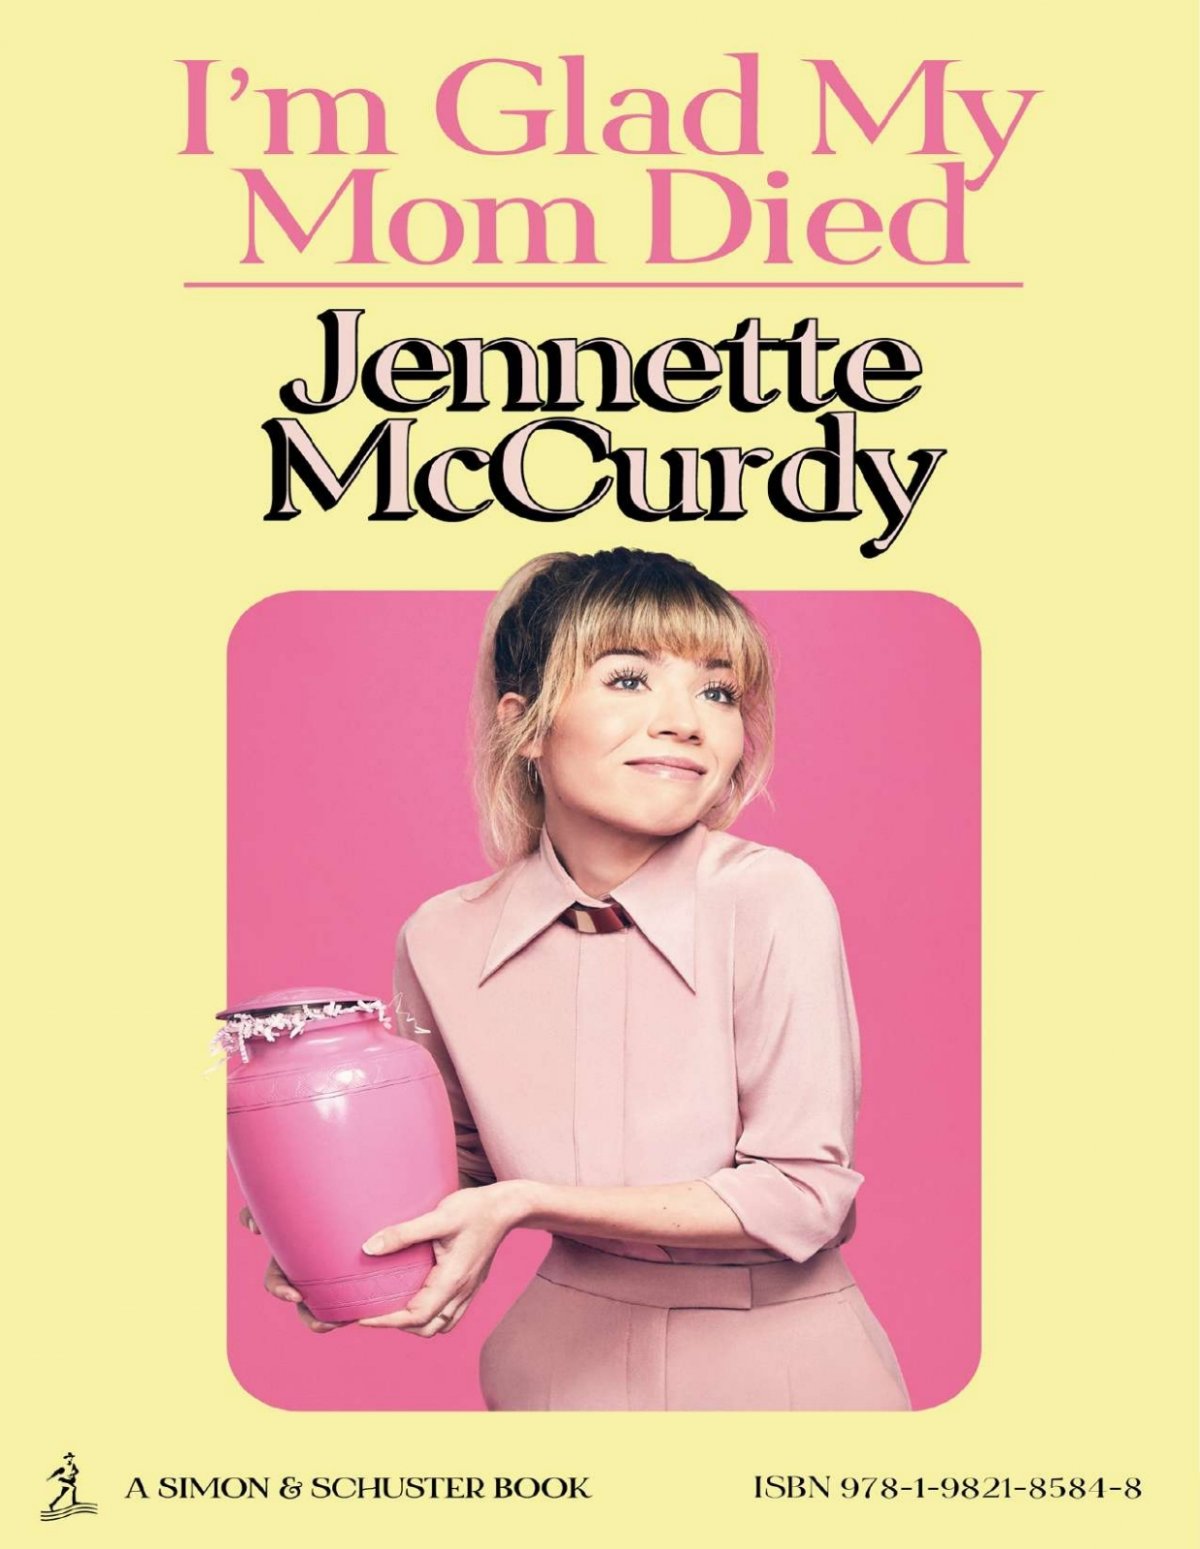 Im-Glad-My-Mom-Died-By-Jennette-Mccurdy(1)